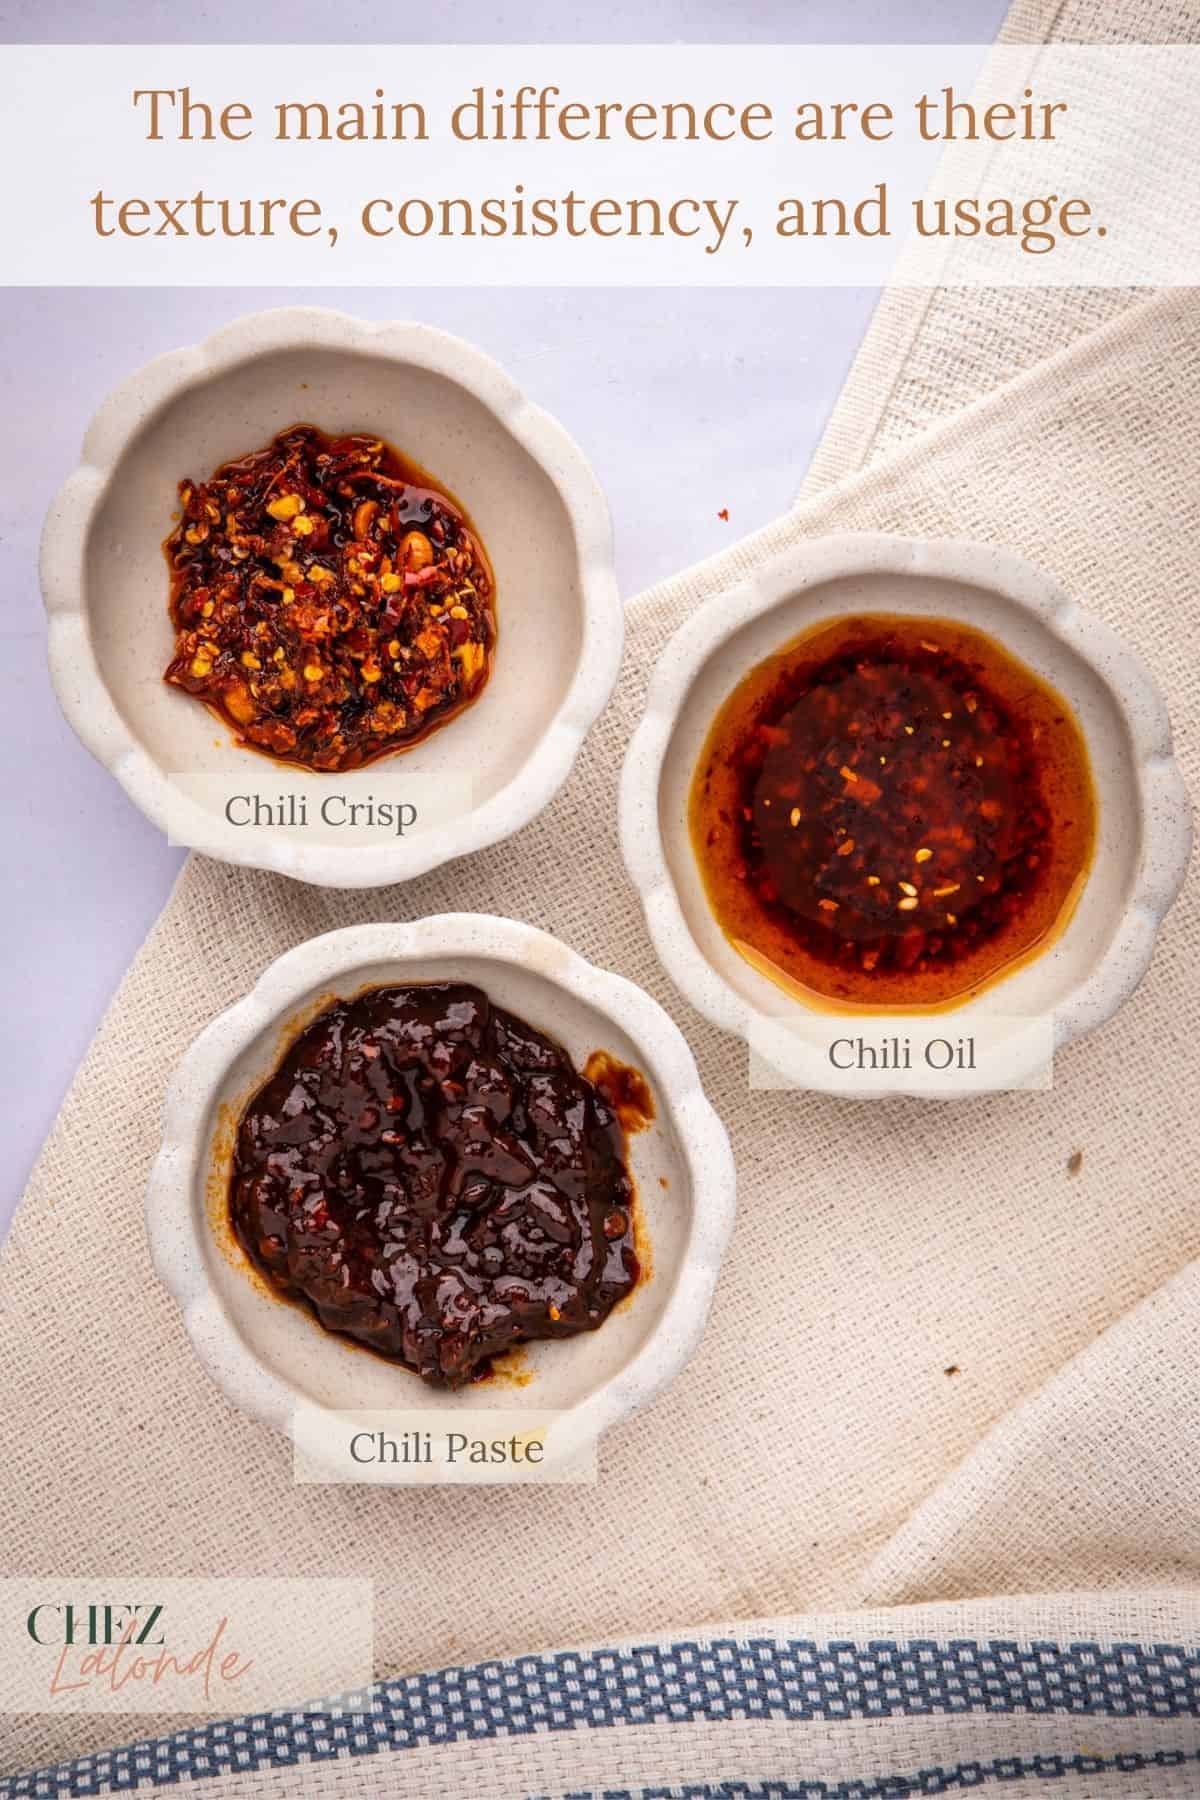 3 small saucer with Chili Oil, chili paste, and chili crisp to show readers the difference between their texture, consistency, and usage. 